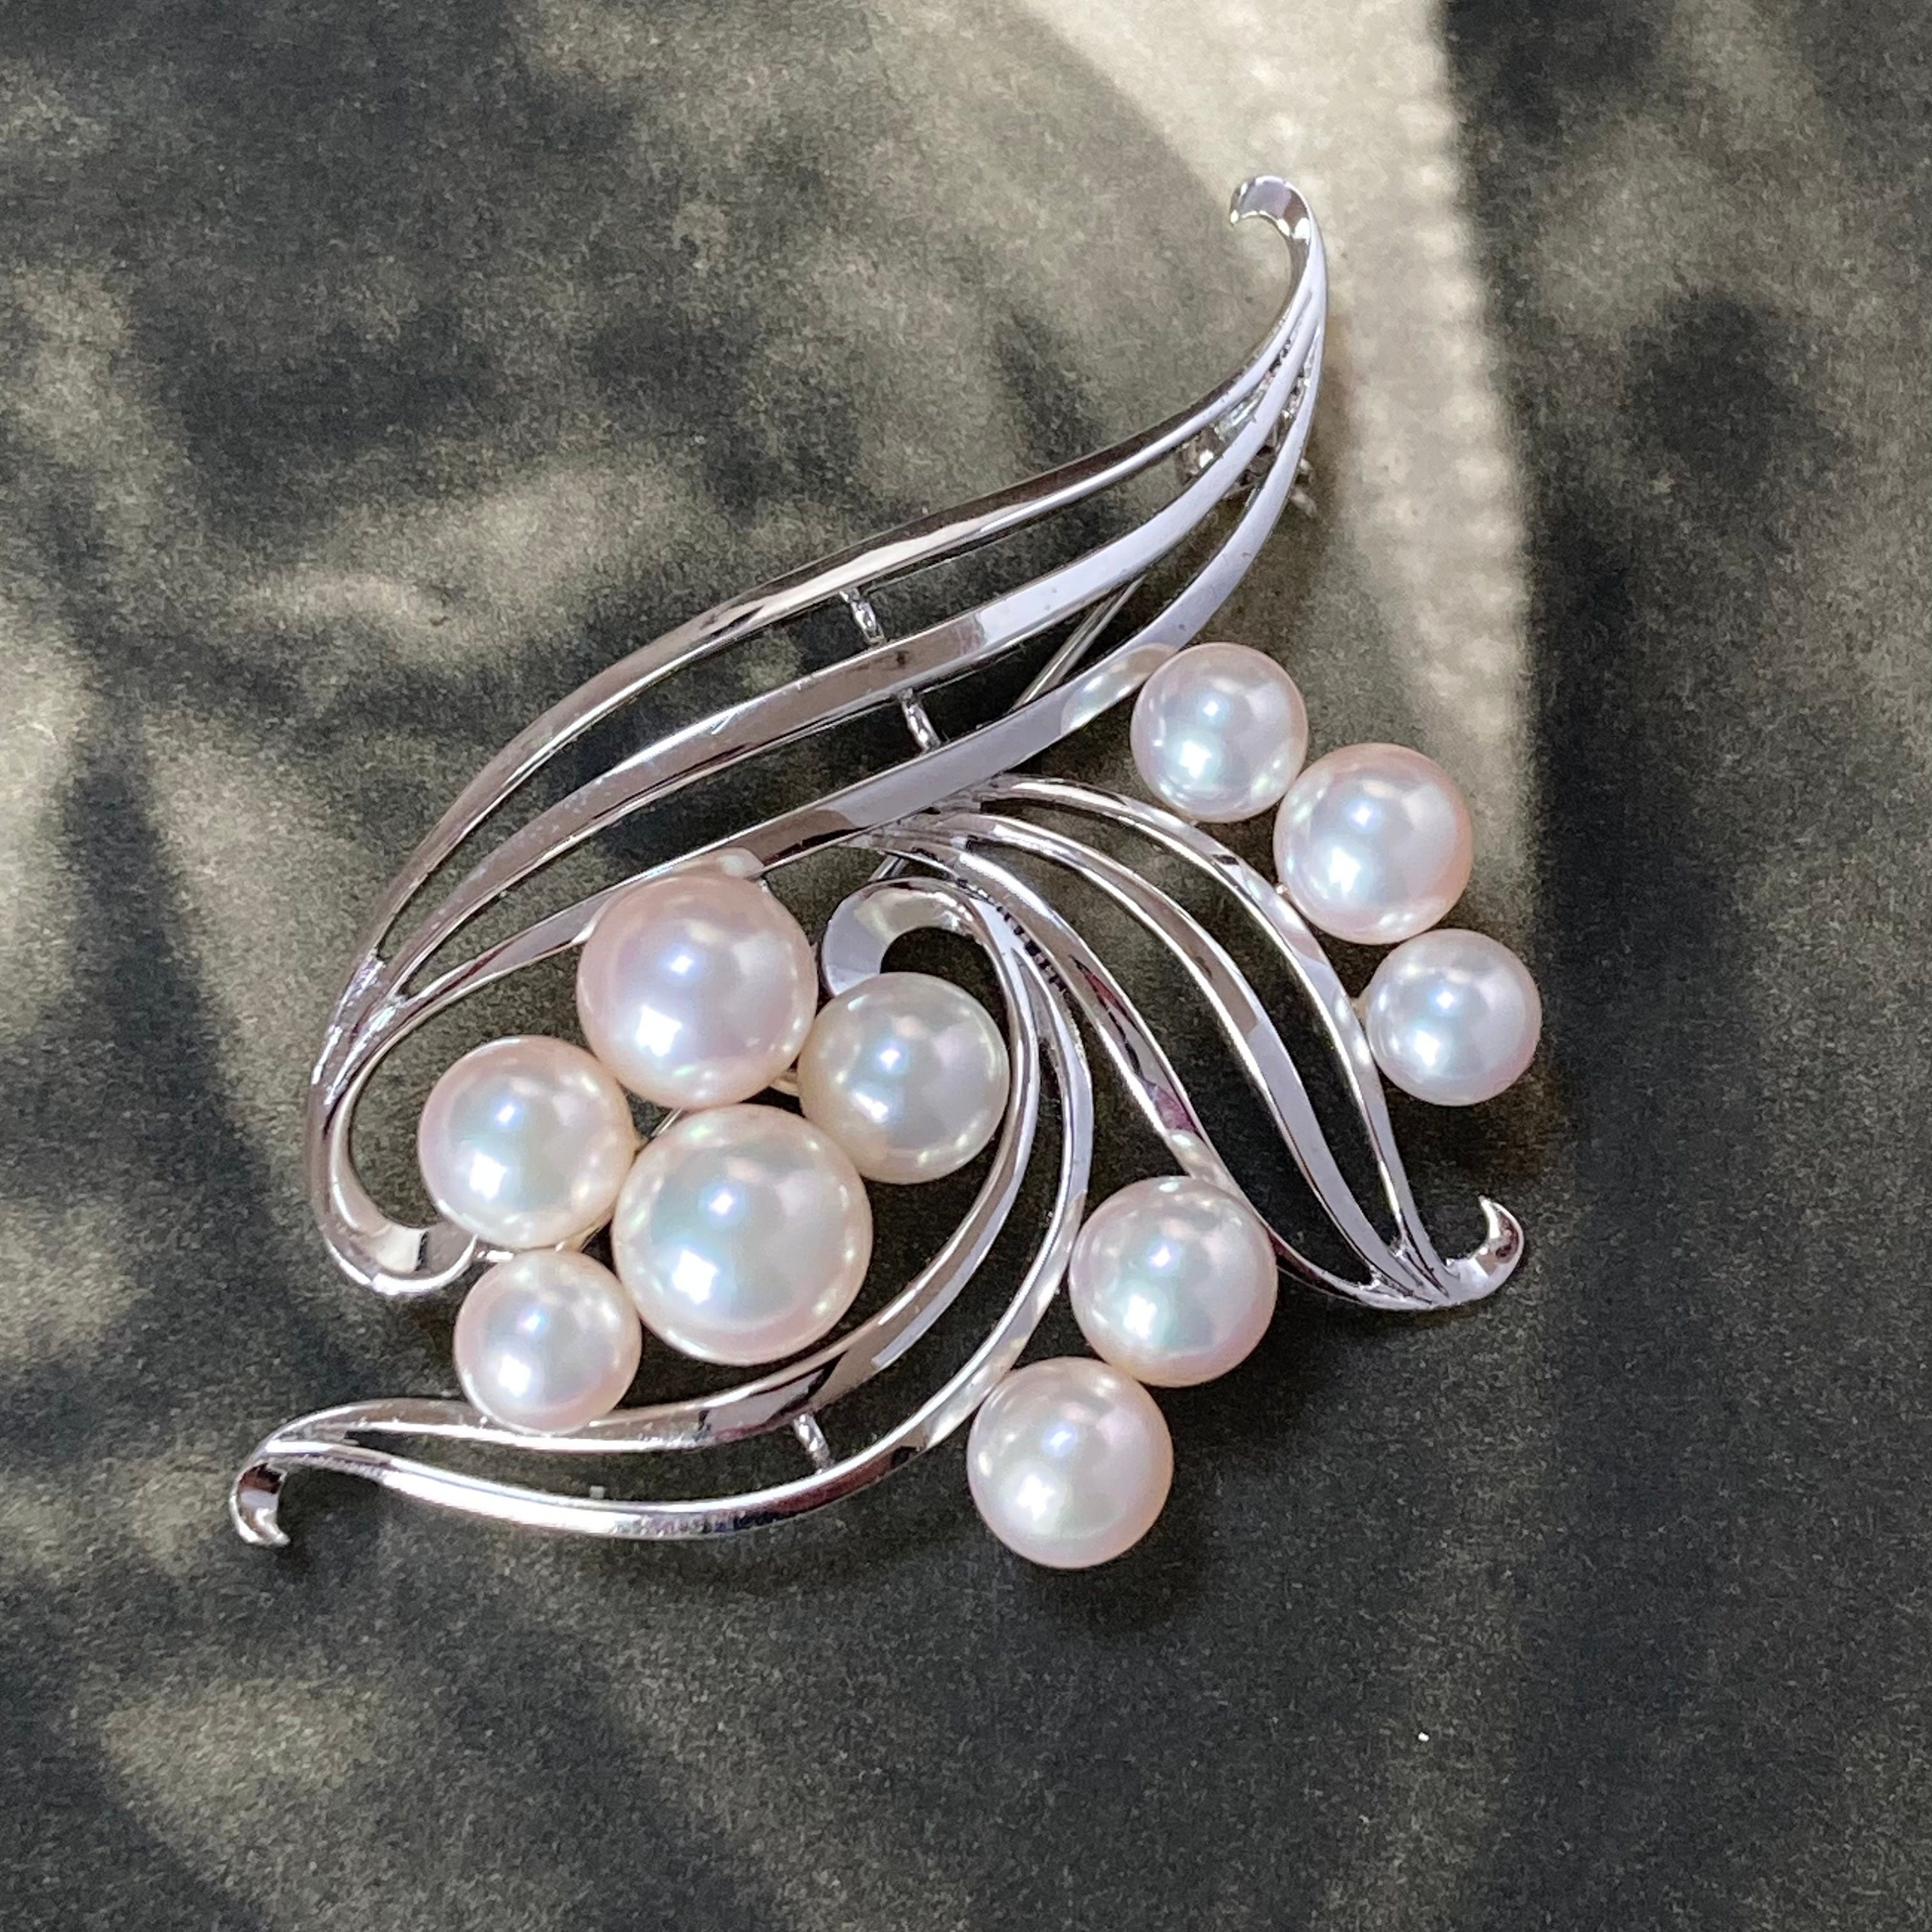 Vintage Mikimoto Pearl Brooch Made From Silver & Set With 10 Aaa Gem Quality Pearls